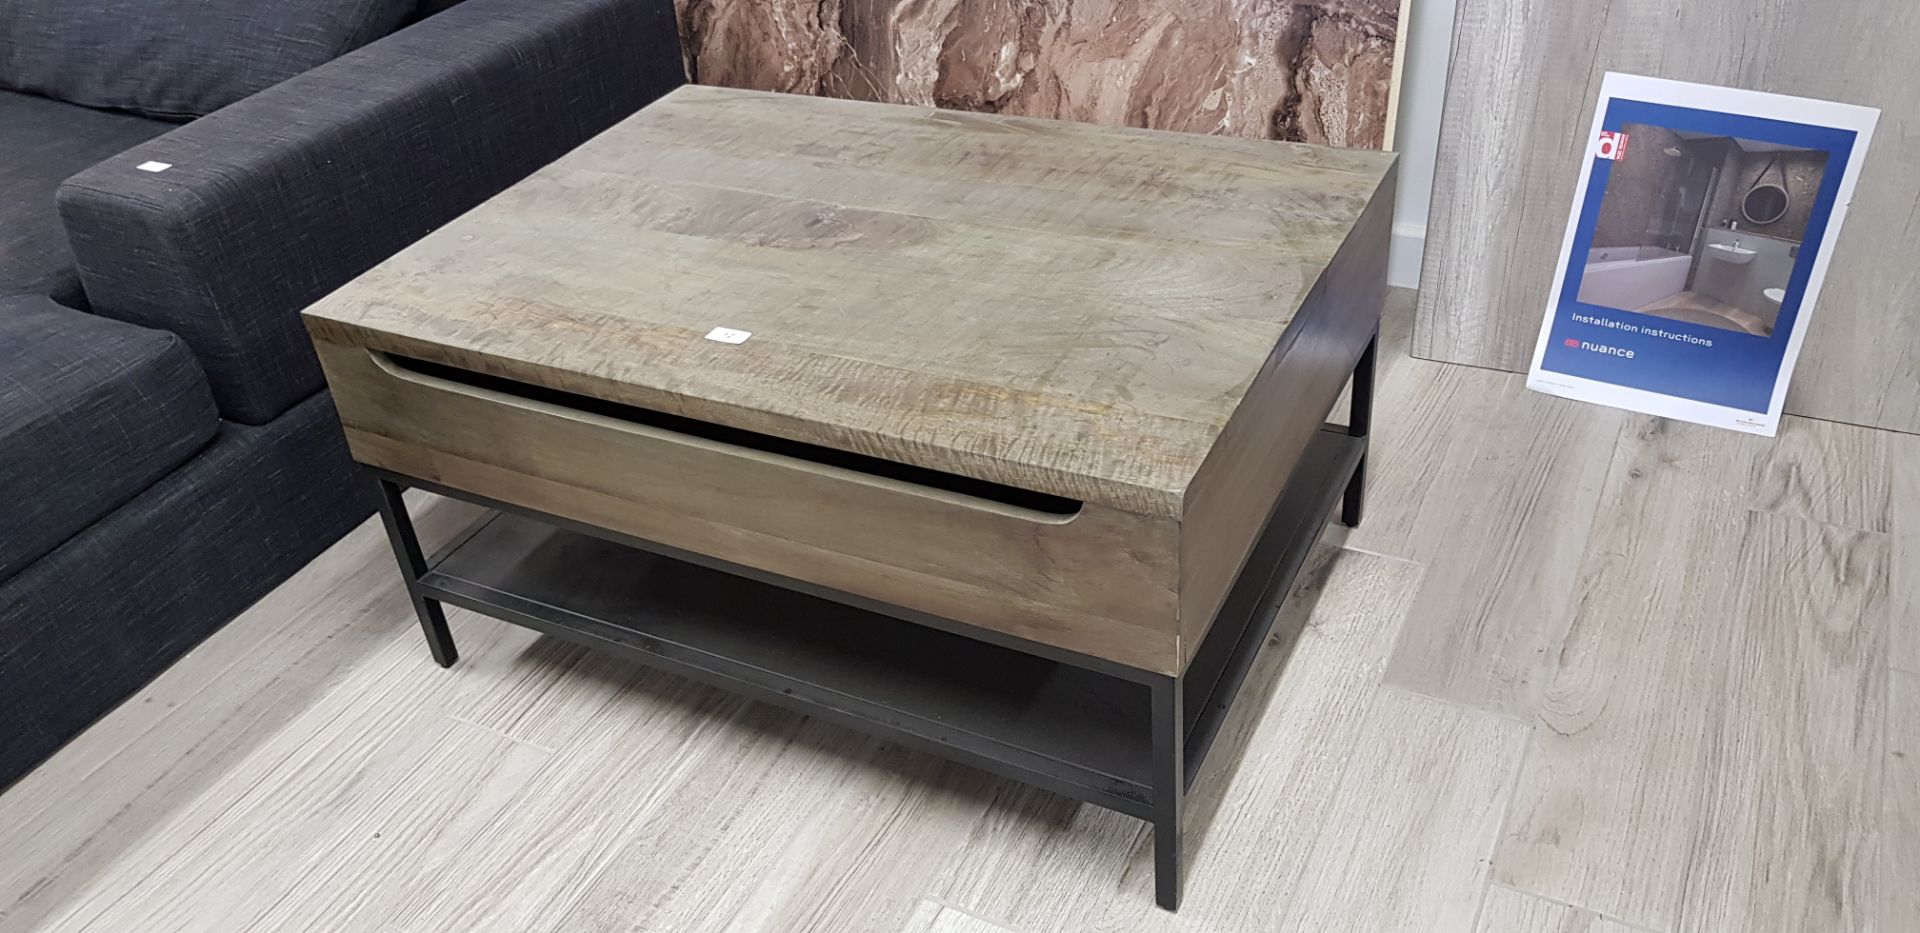 Large coffee / side table